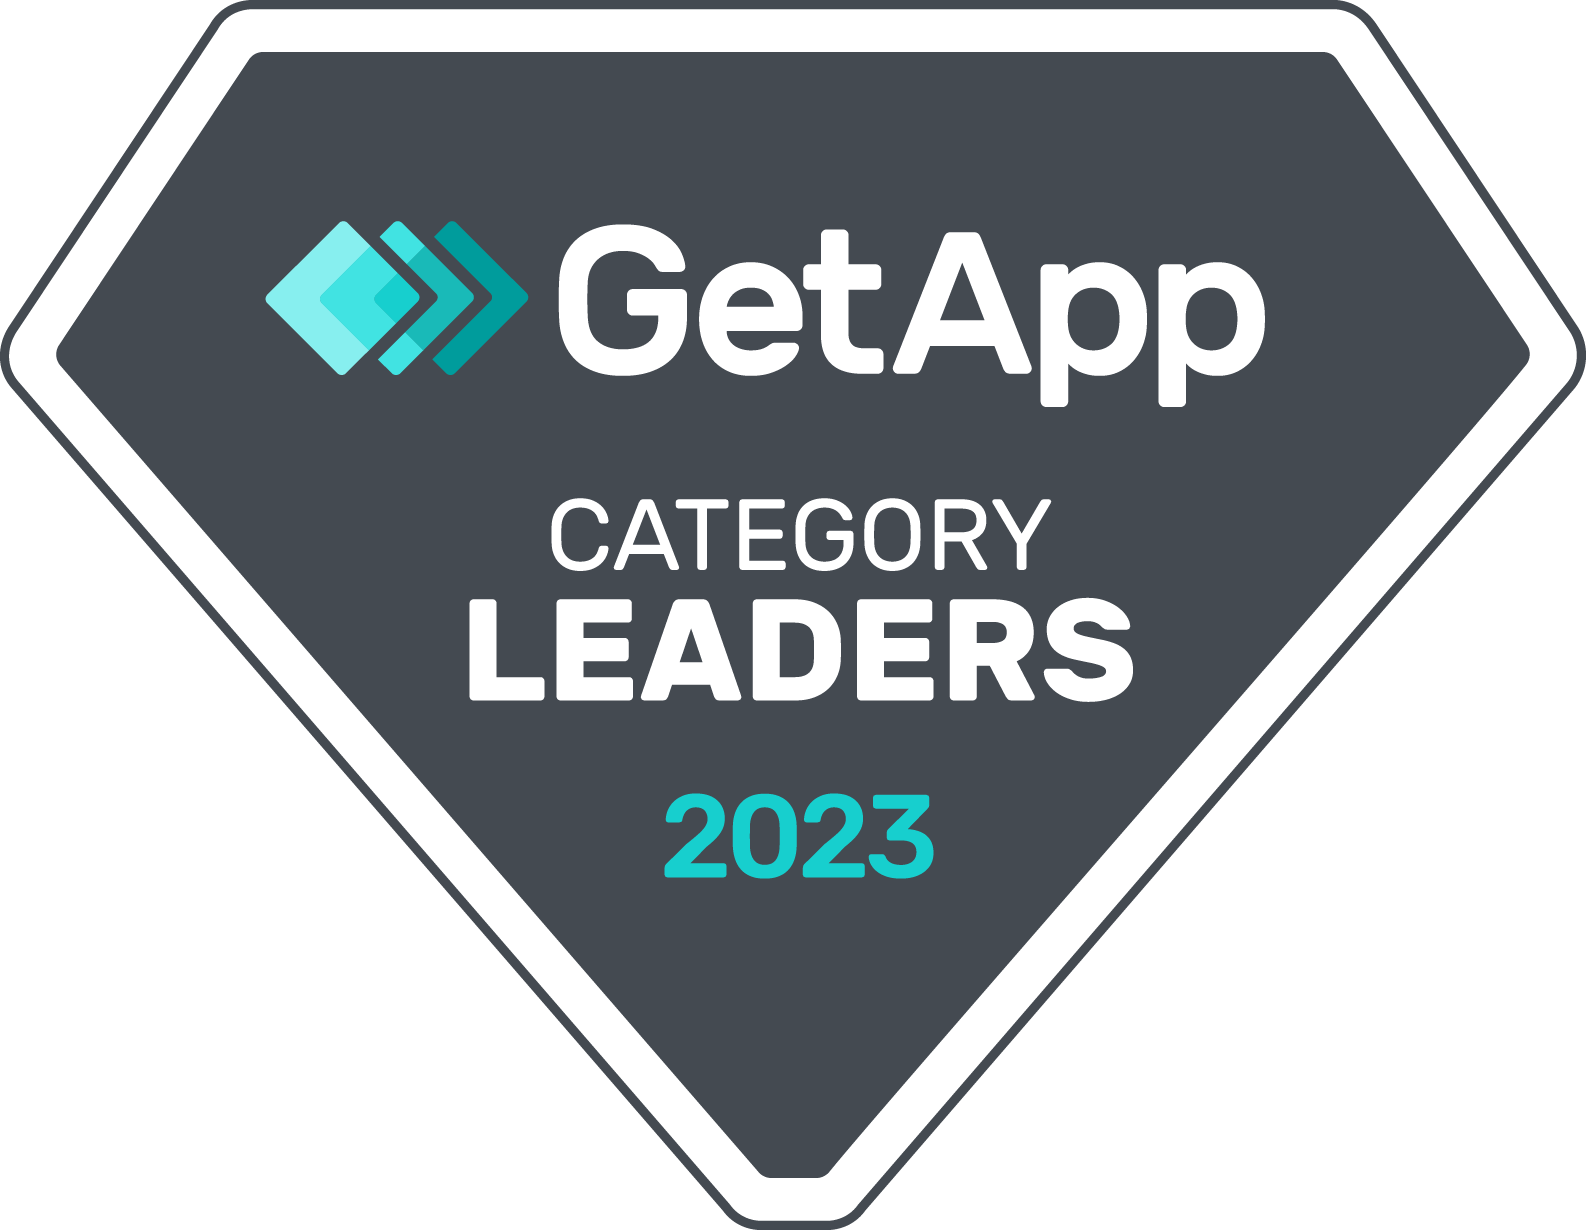 GetApp's 2022 Category Leader badge for Forms Automation